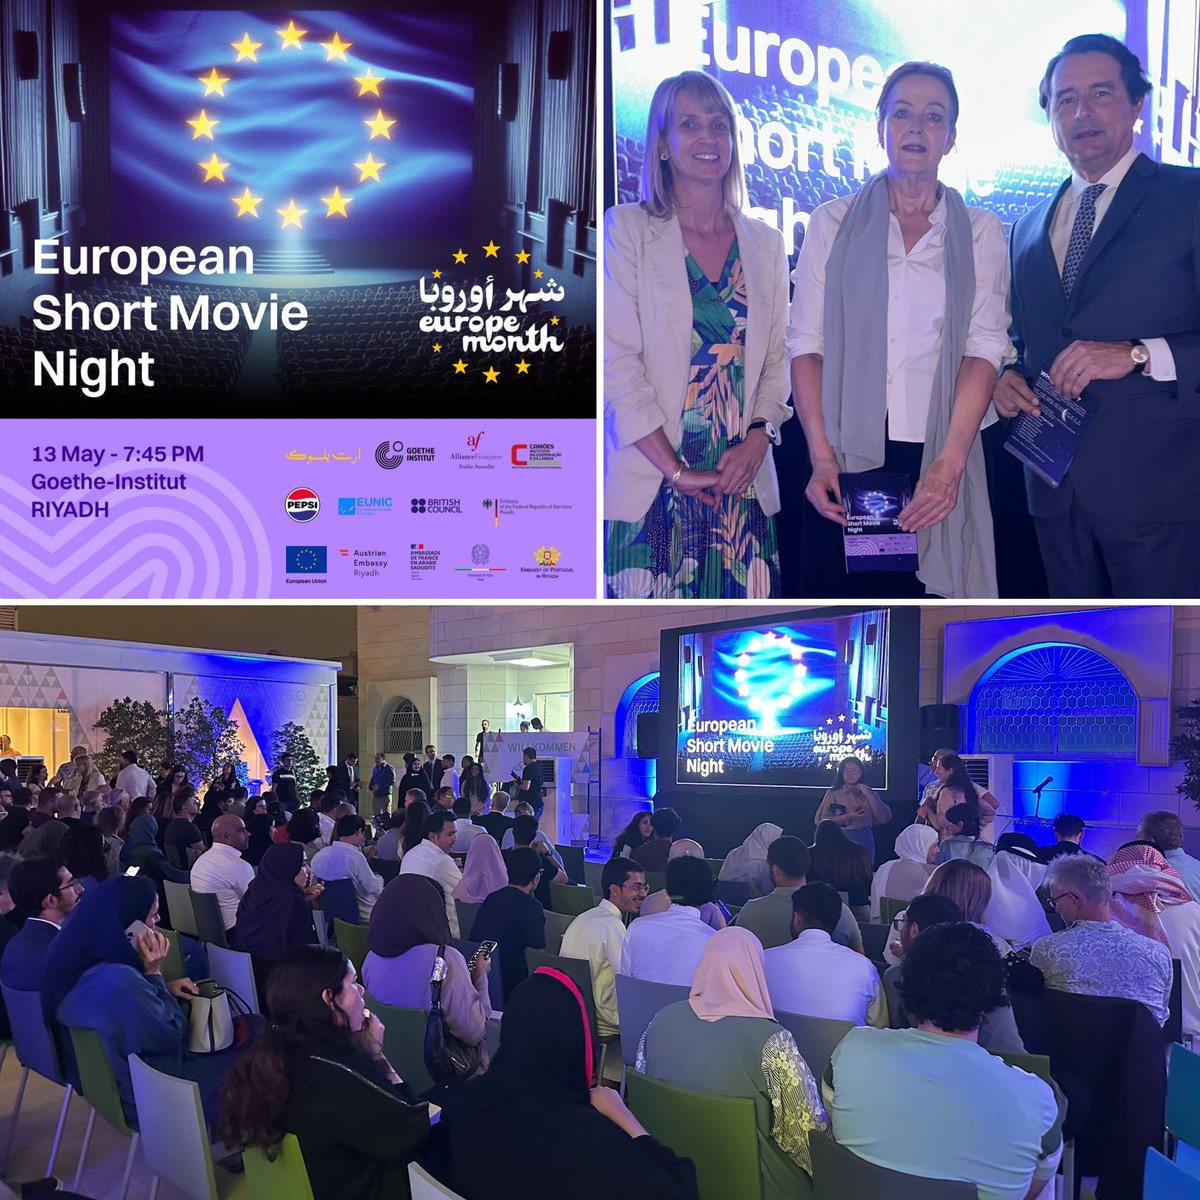 Pleased to join the European & Saudi short movies at the 🇪🇺 Short Movie Night at the Goethe-Institut in #Riyadh 🇸🇦 featuring Portuguese 🇵🇹 short film “Água mole” (Drop by Drop). @EUintheGCC @camoes_ip @Portugal_in_KSA @nestrangeiro_pt